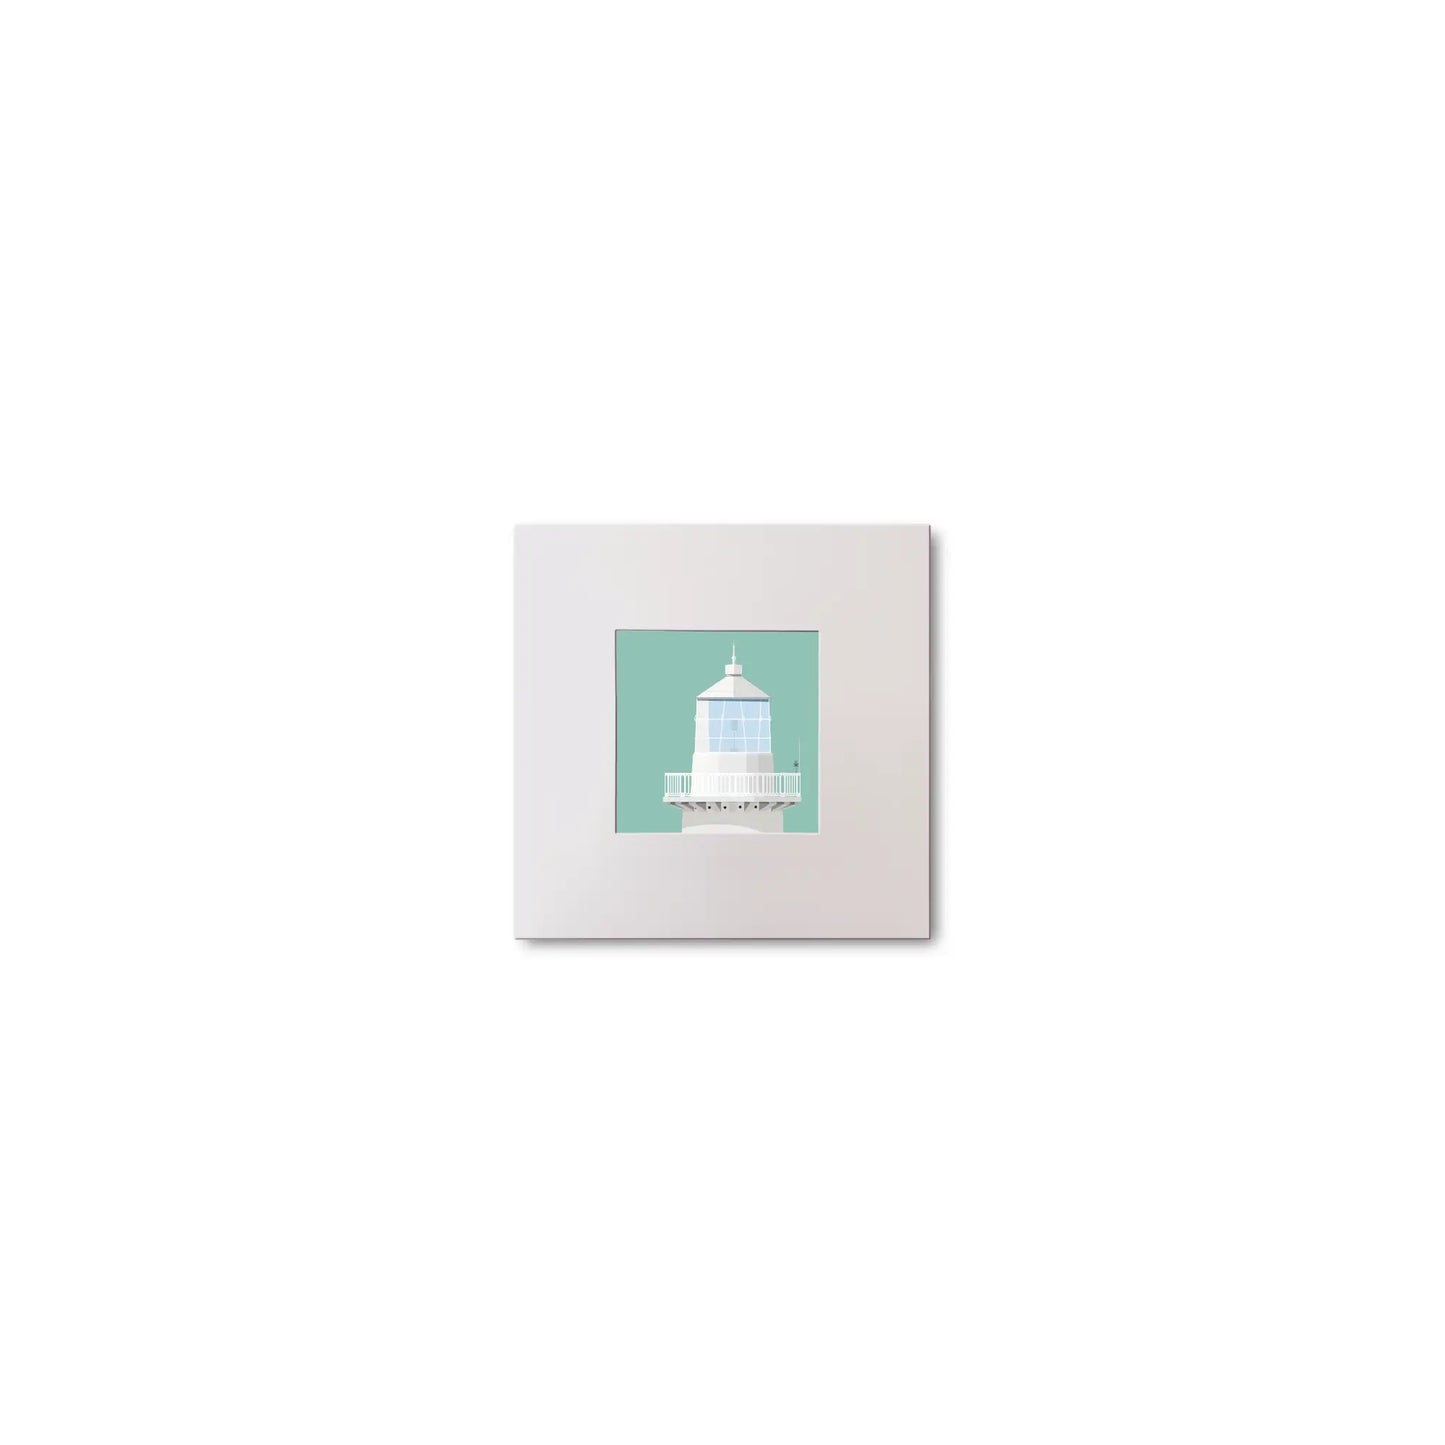 Illustration Eeragh lighthouse on an ocean green background, mounted and measuring 10x10cm.